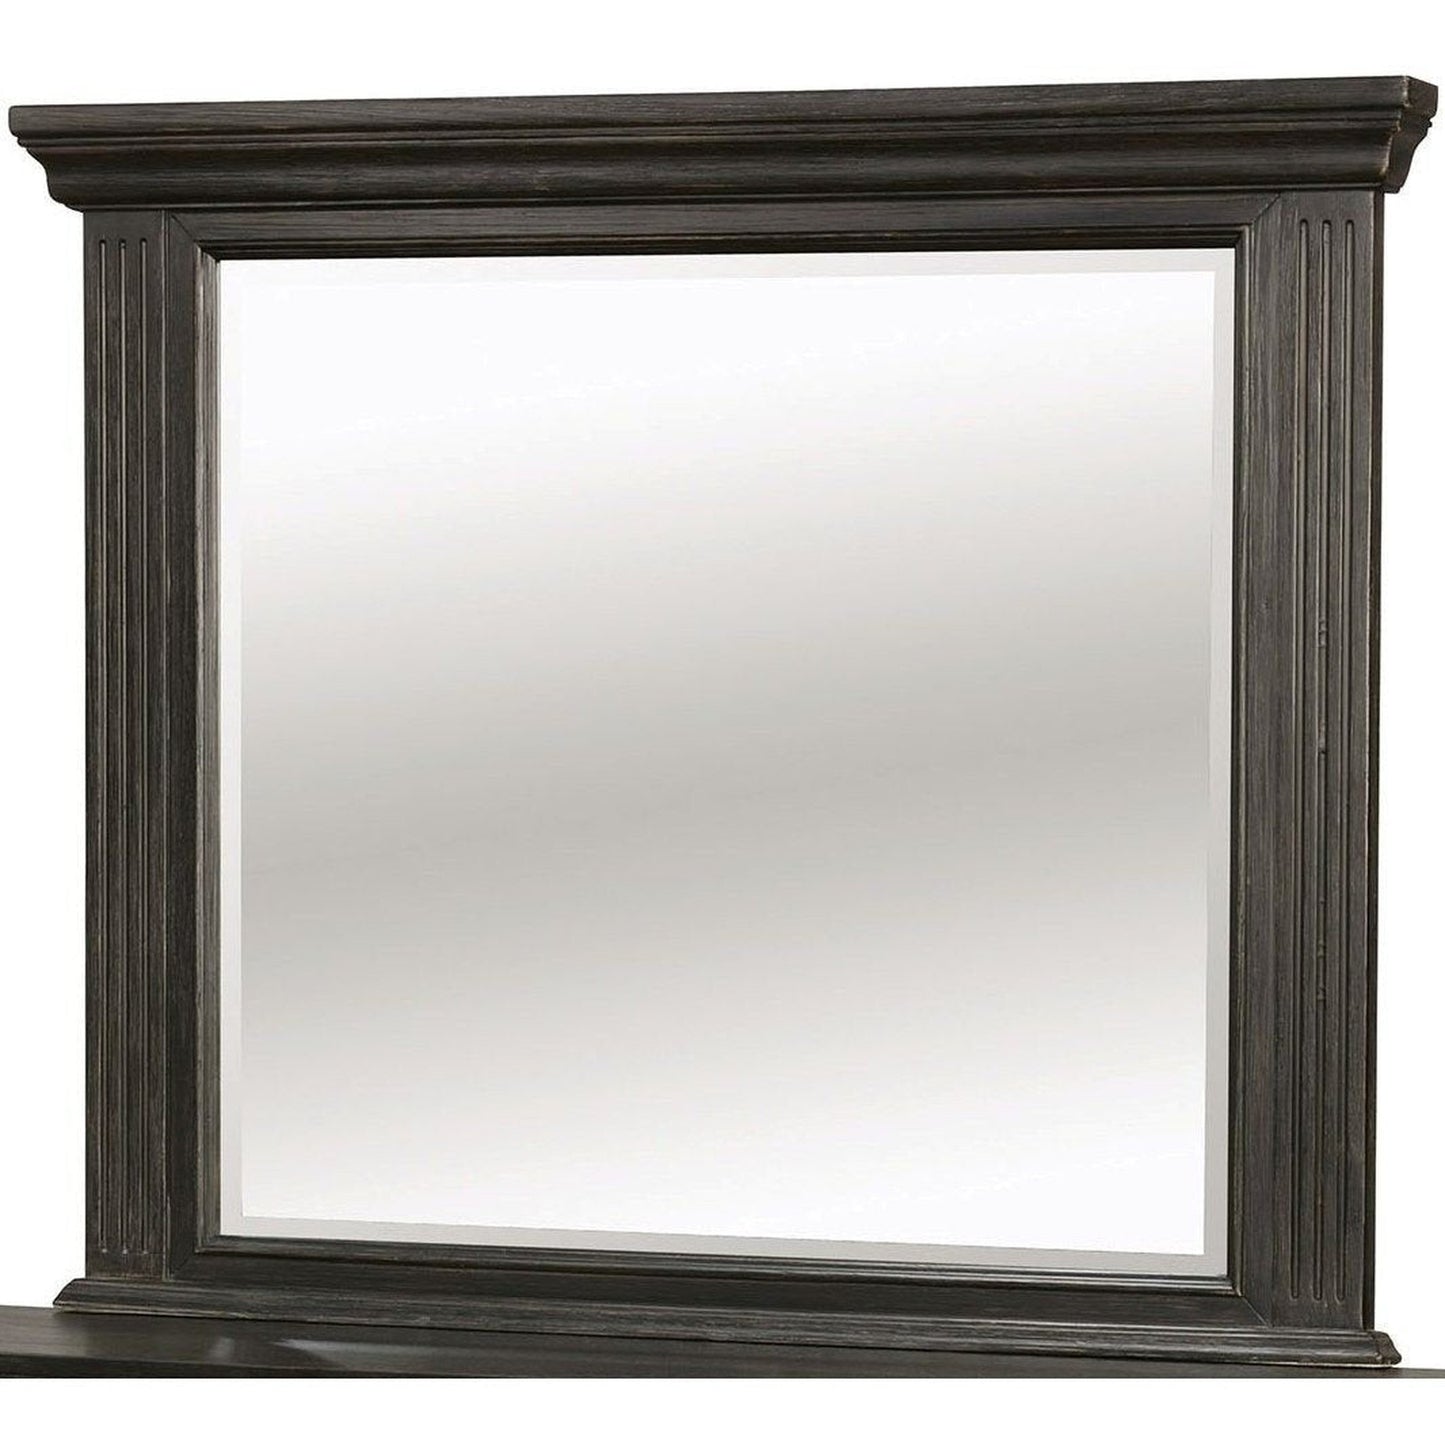 Benzara Roisin Wire-Brushed Black Transitional Style Wooden Framed Wall Mirror